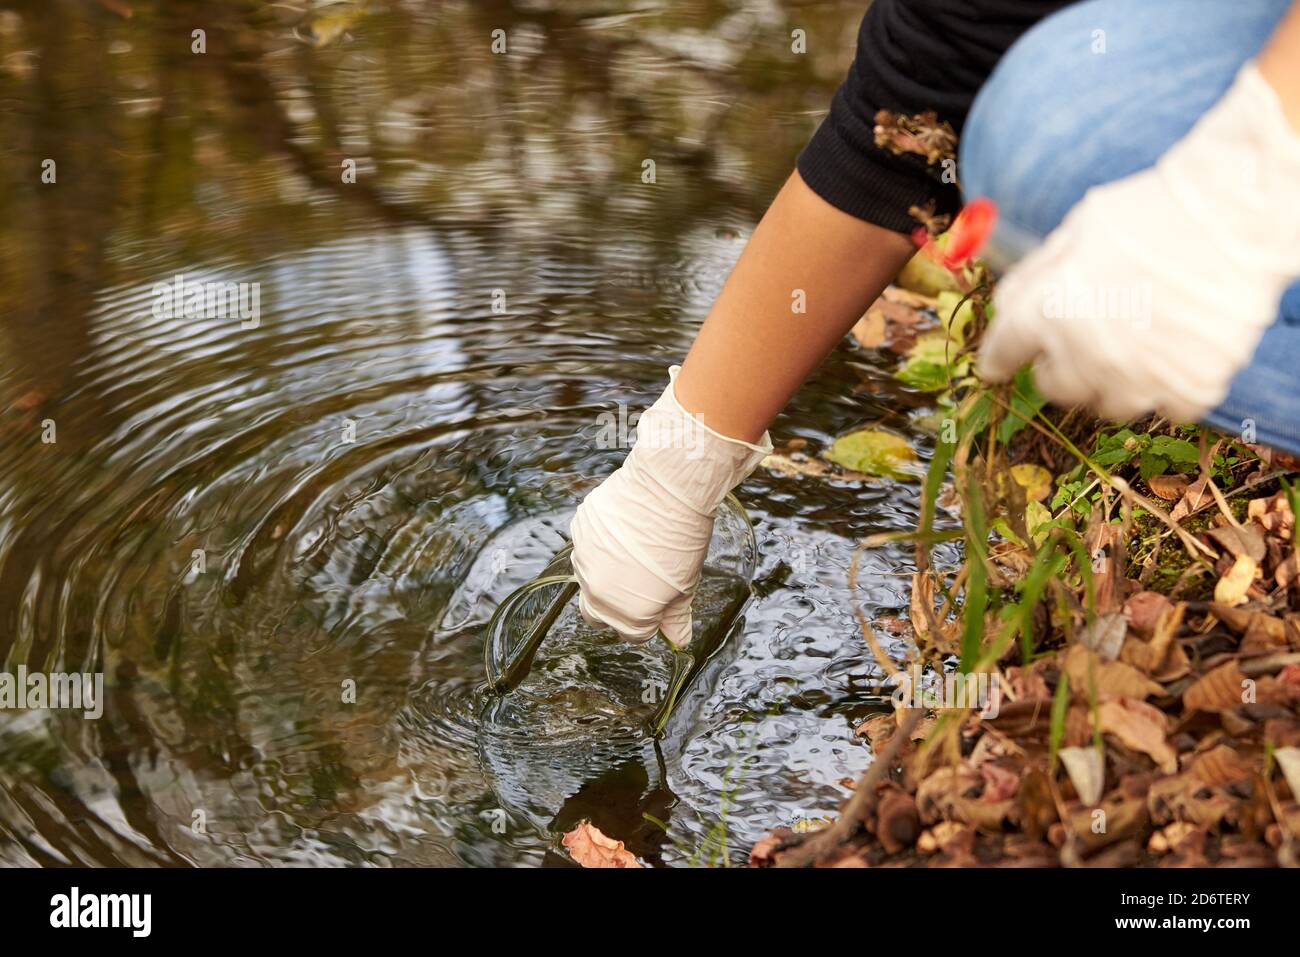 A scientist collects river water in a glass beaker for testing. Stock Photo